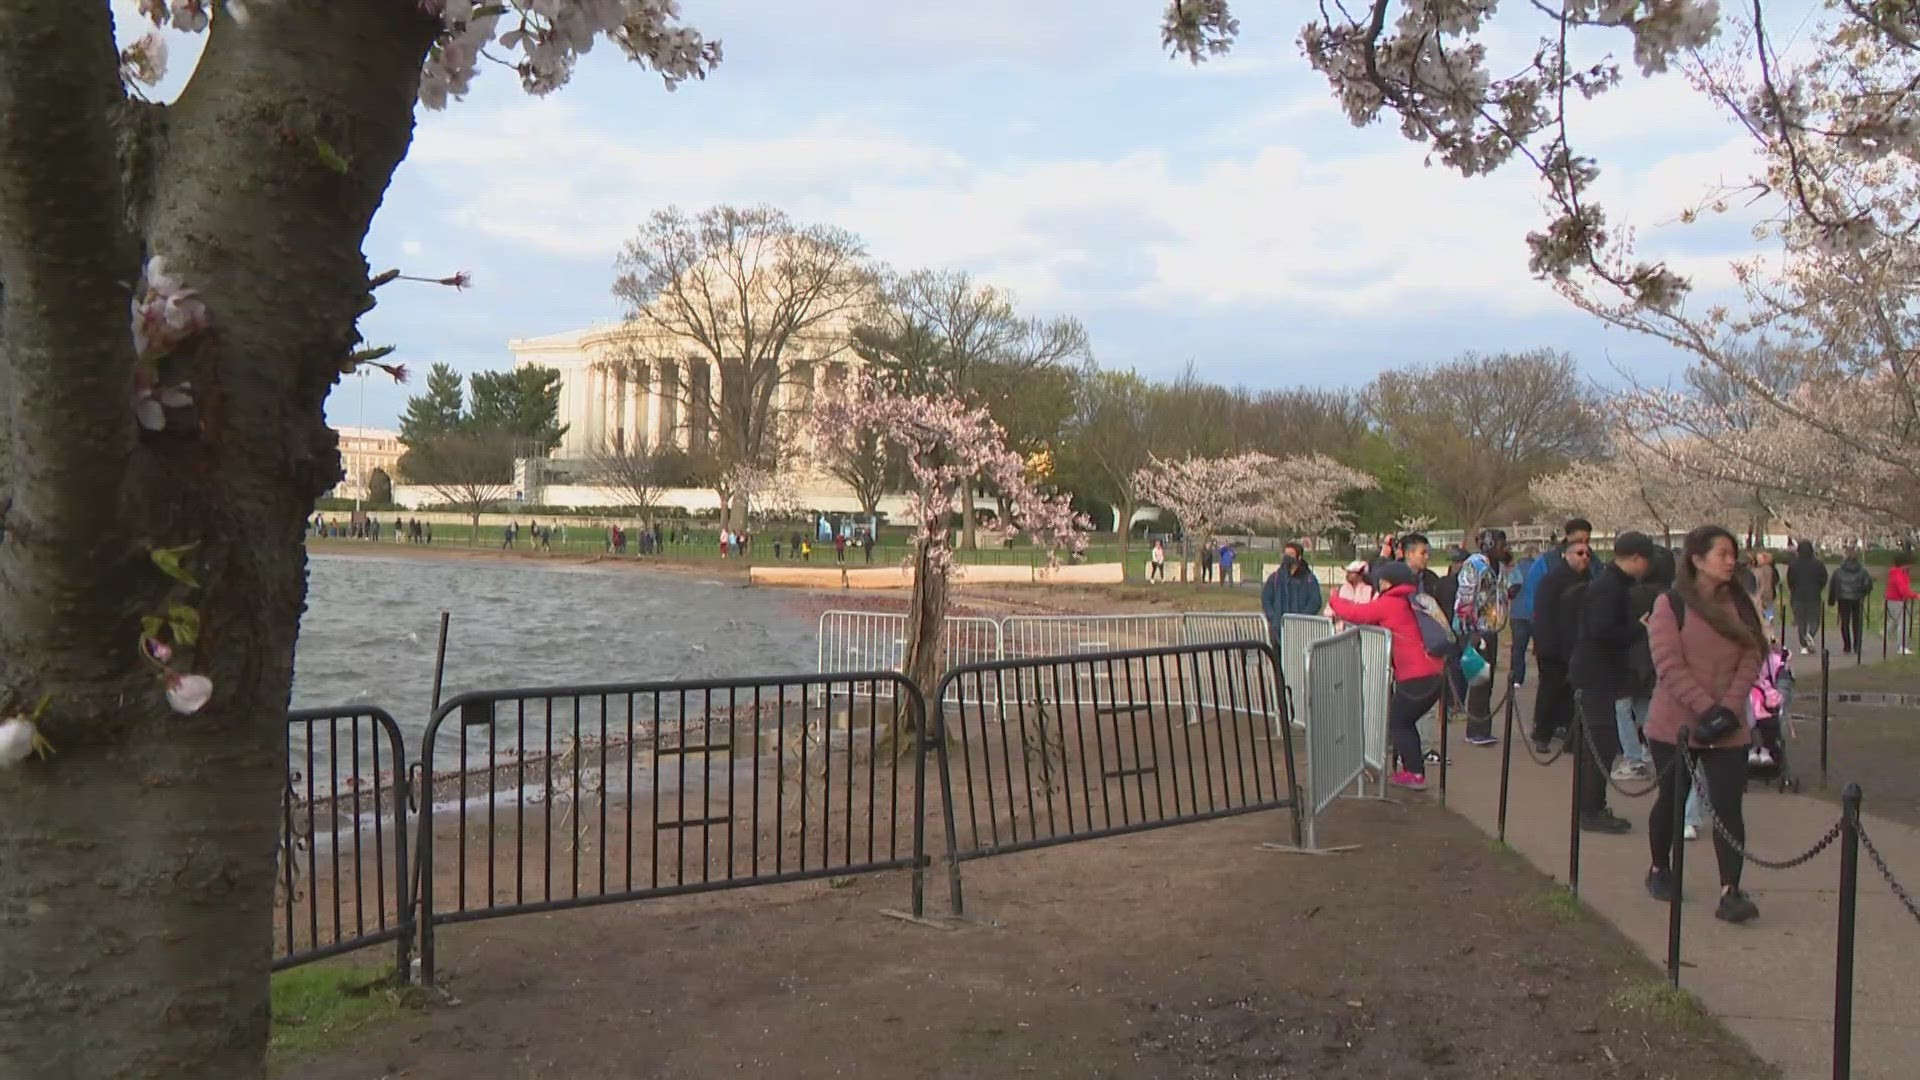 More than a 100 years ago, the mayor of Tokyo gifted DC 3-thousand cherry blossom trees.